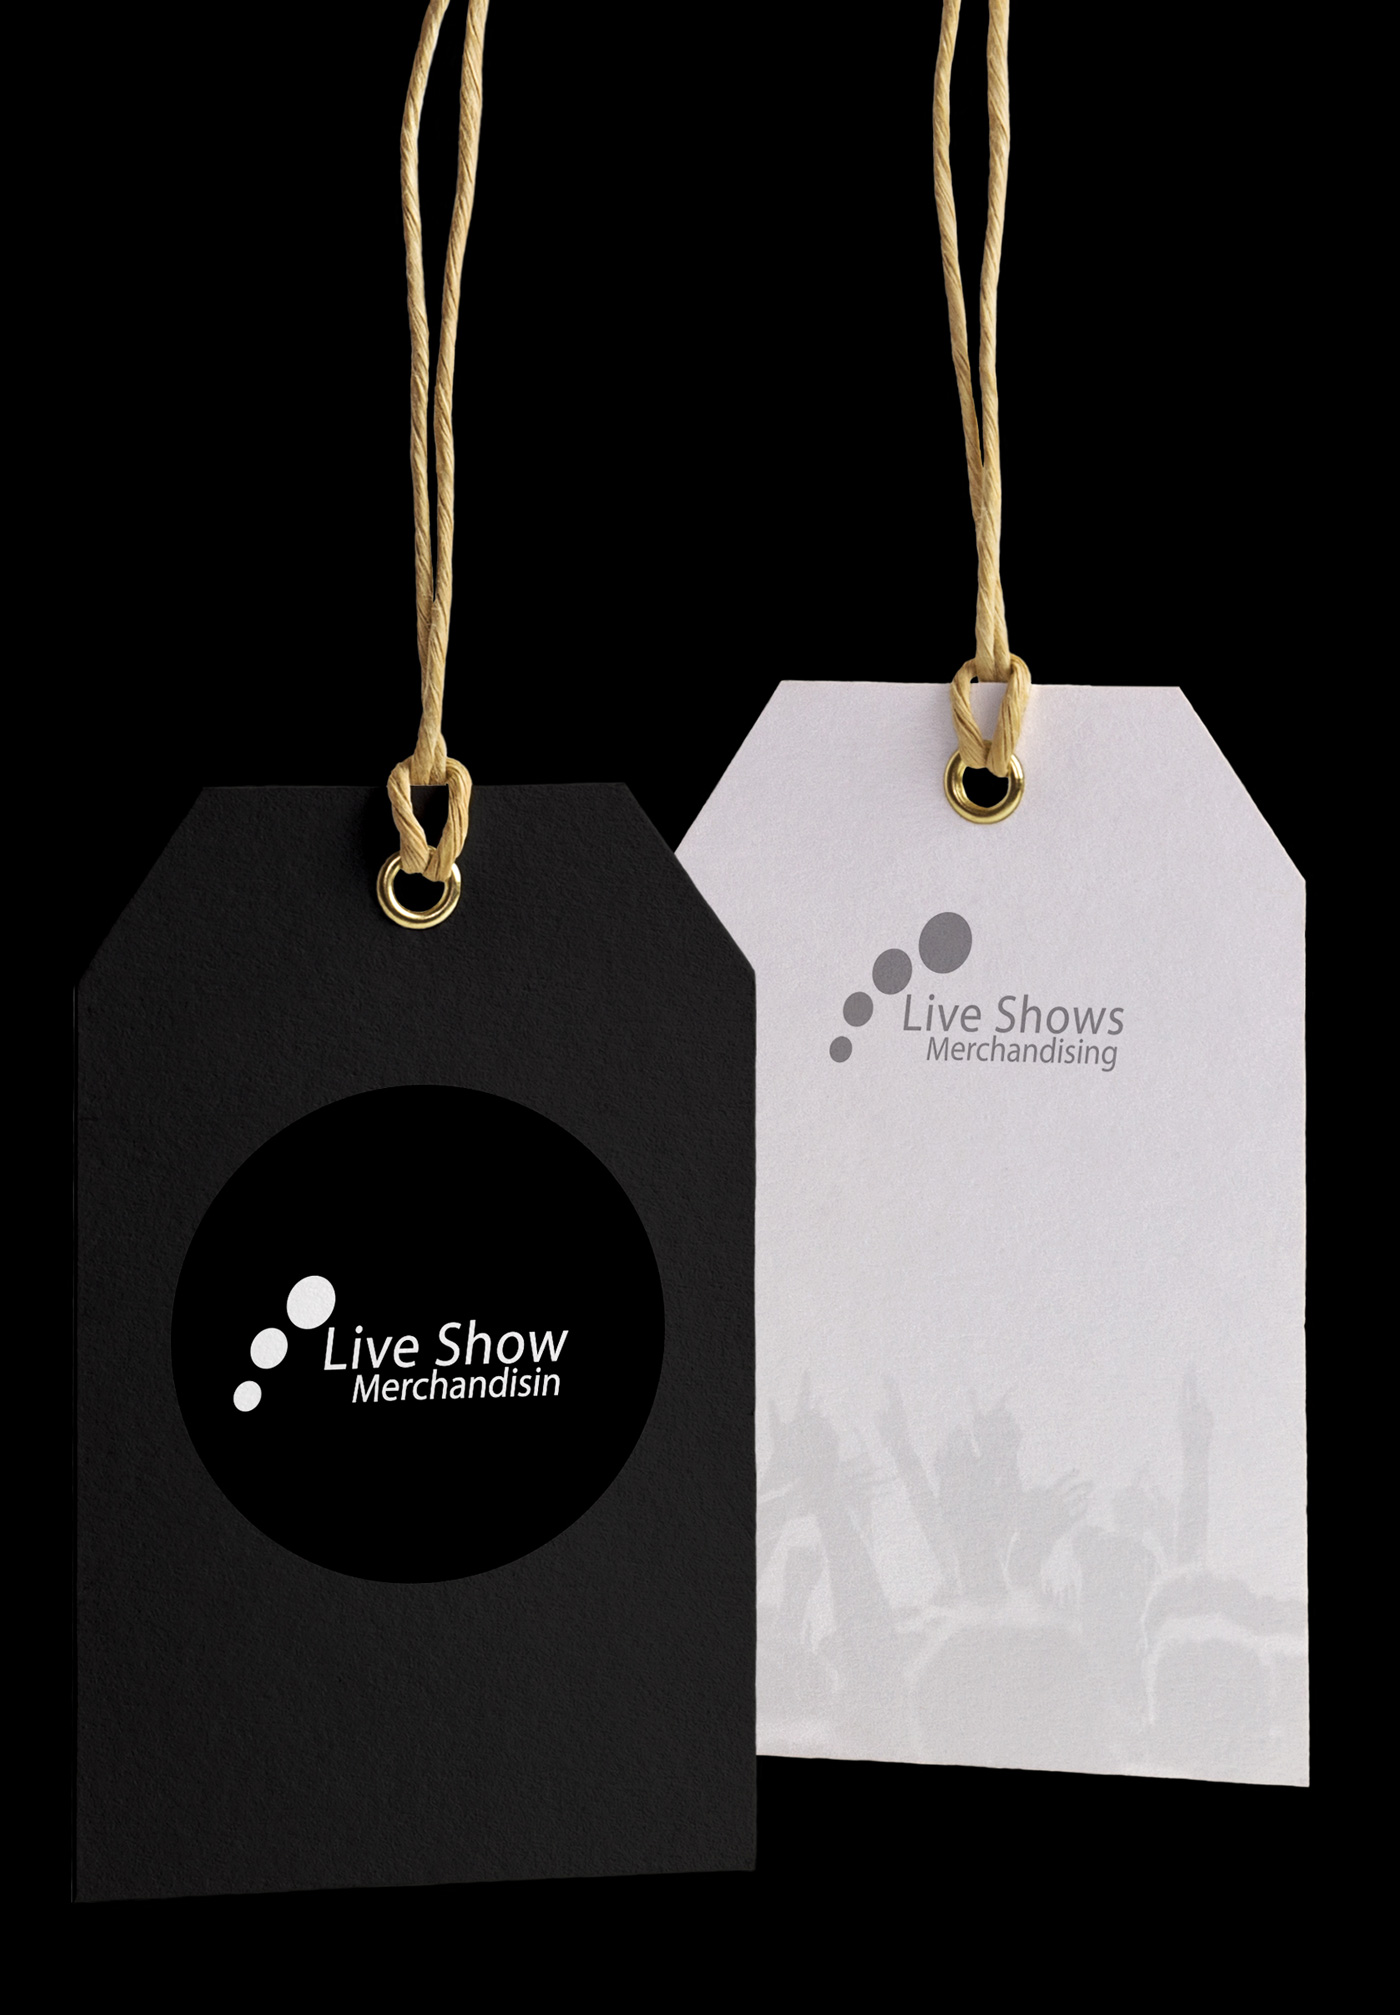 Live Shows Group. Official merchandise.